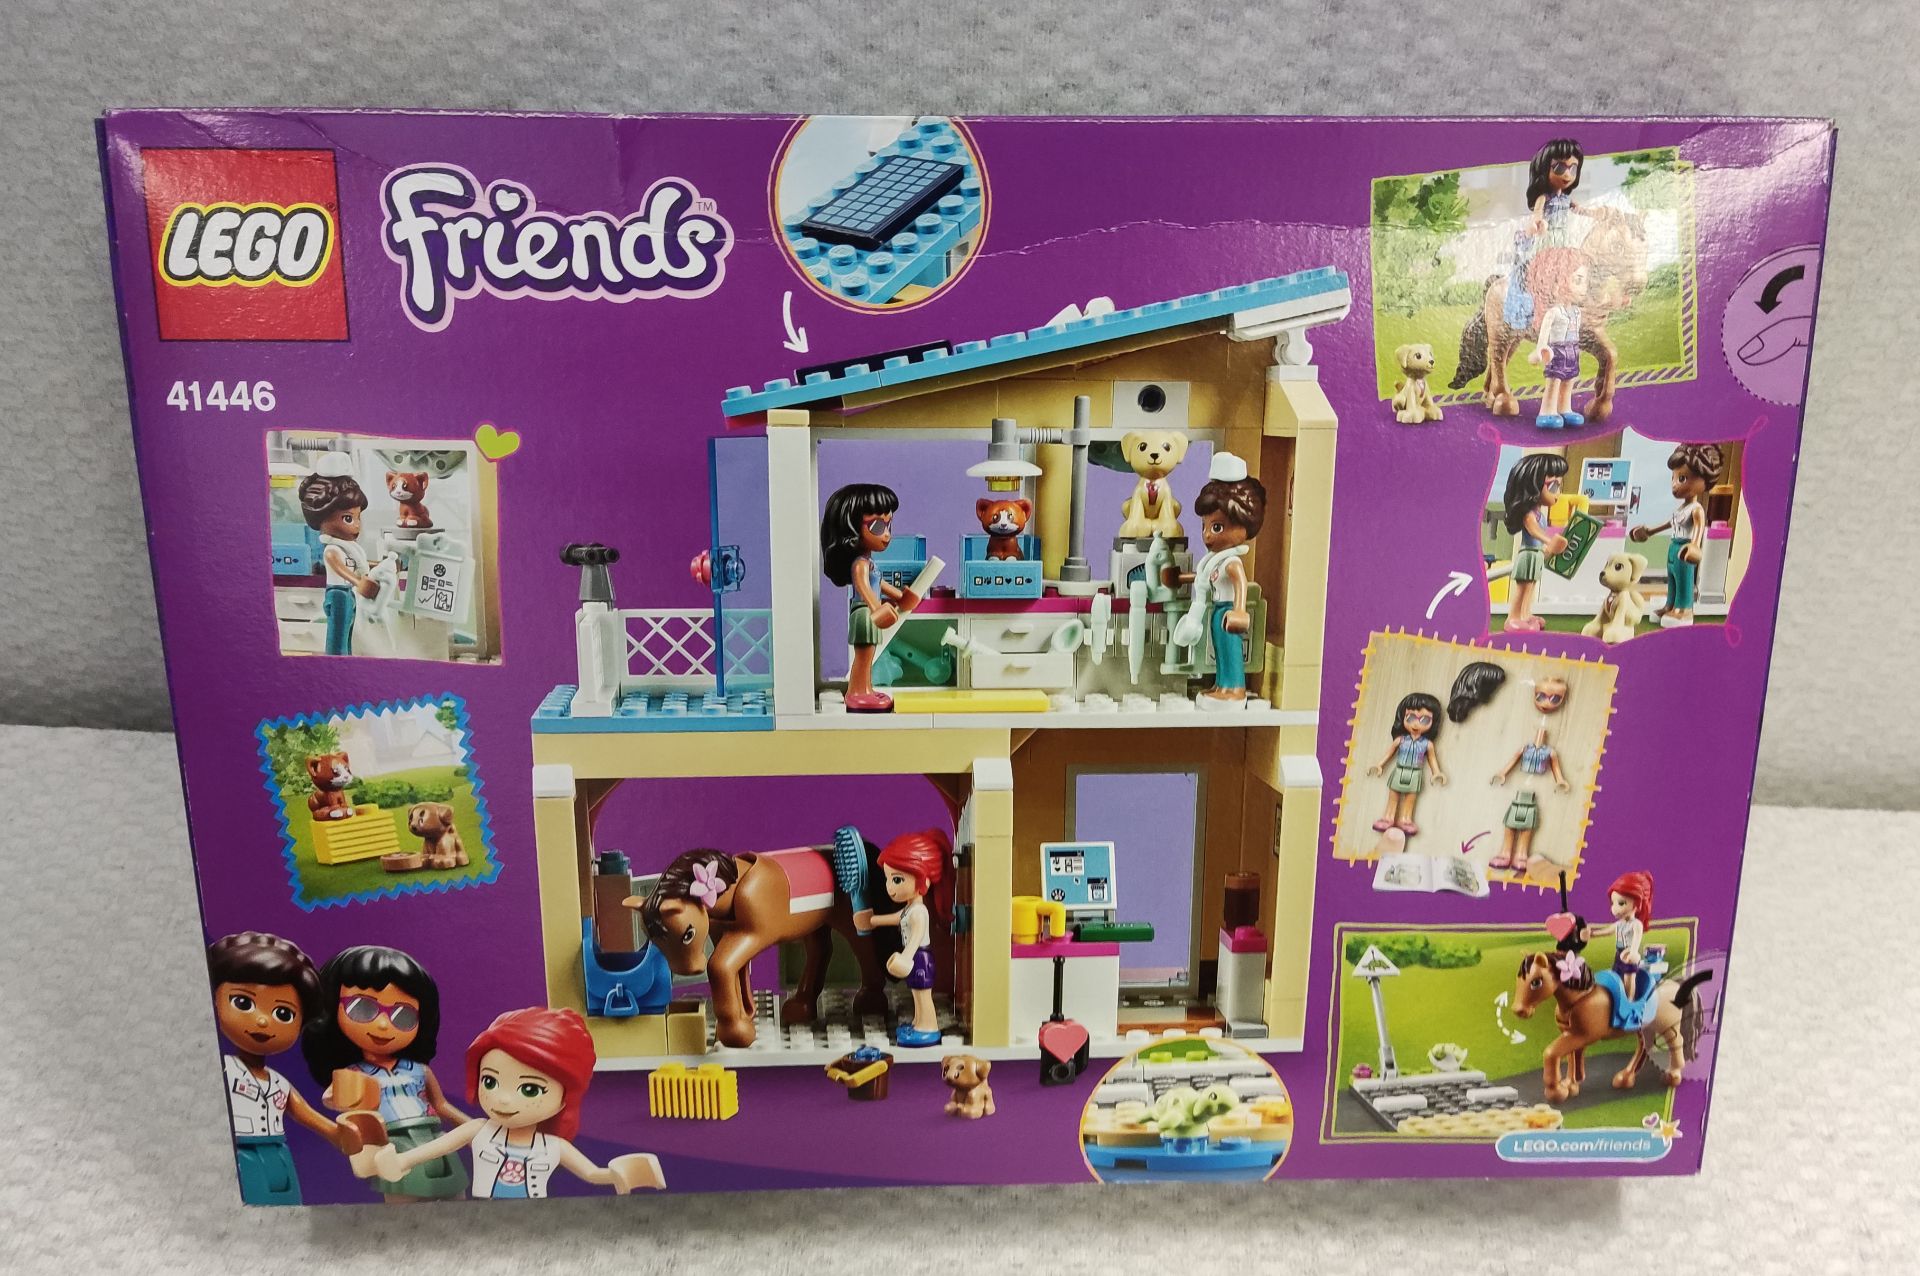 1 x Lego Friends Heartlake City Vet Clinic Animal Rescue Playset - Model 41446 - New/Boxed - Image 3 of 7